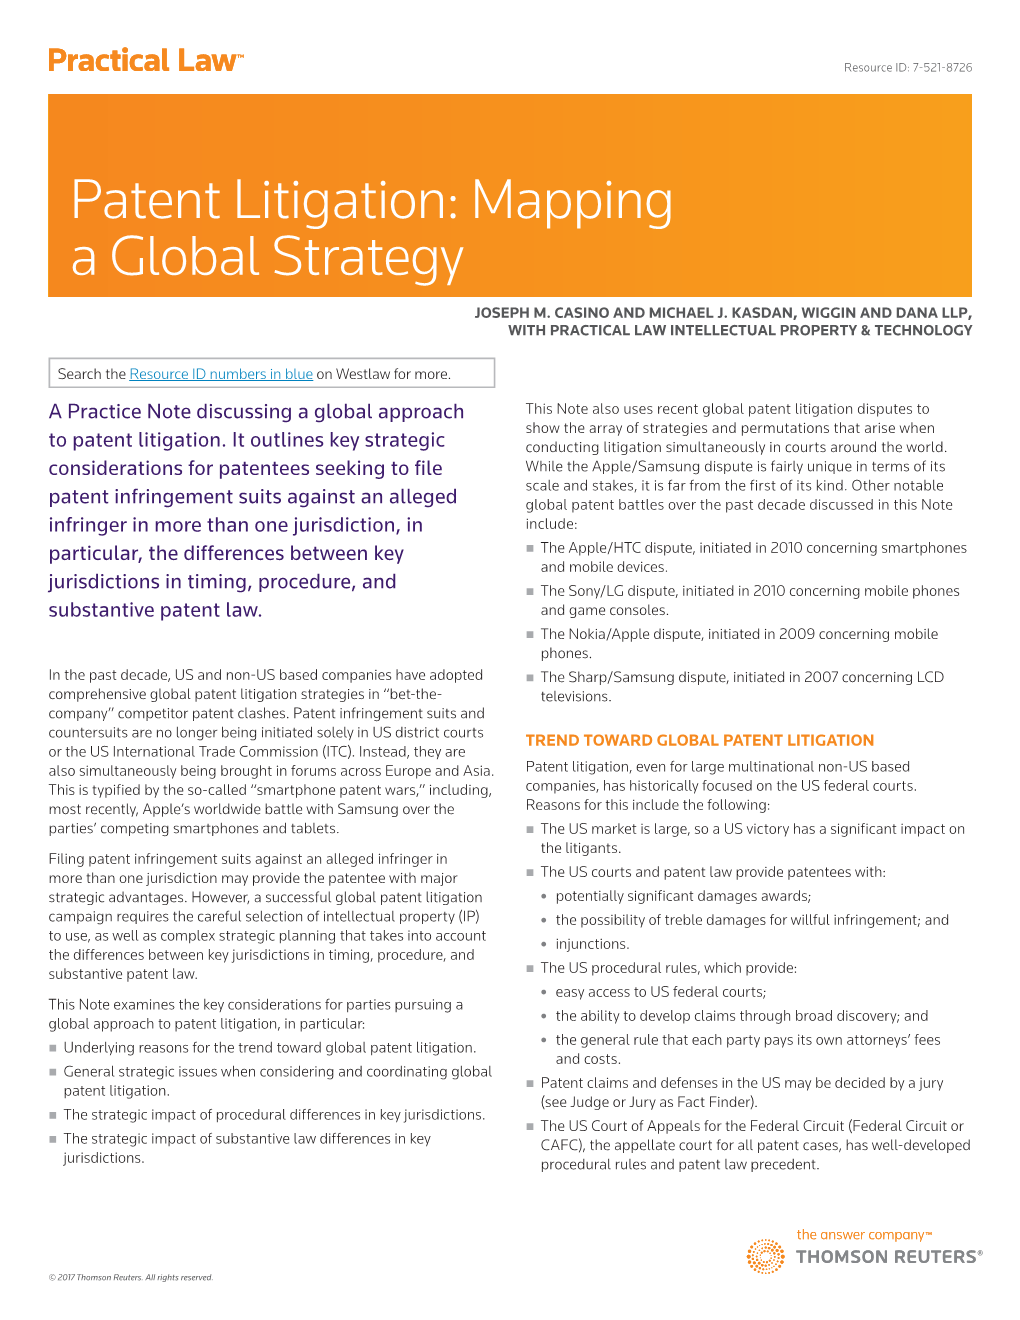 Patent Litigation: Mapping a Global Strategy